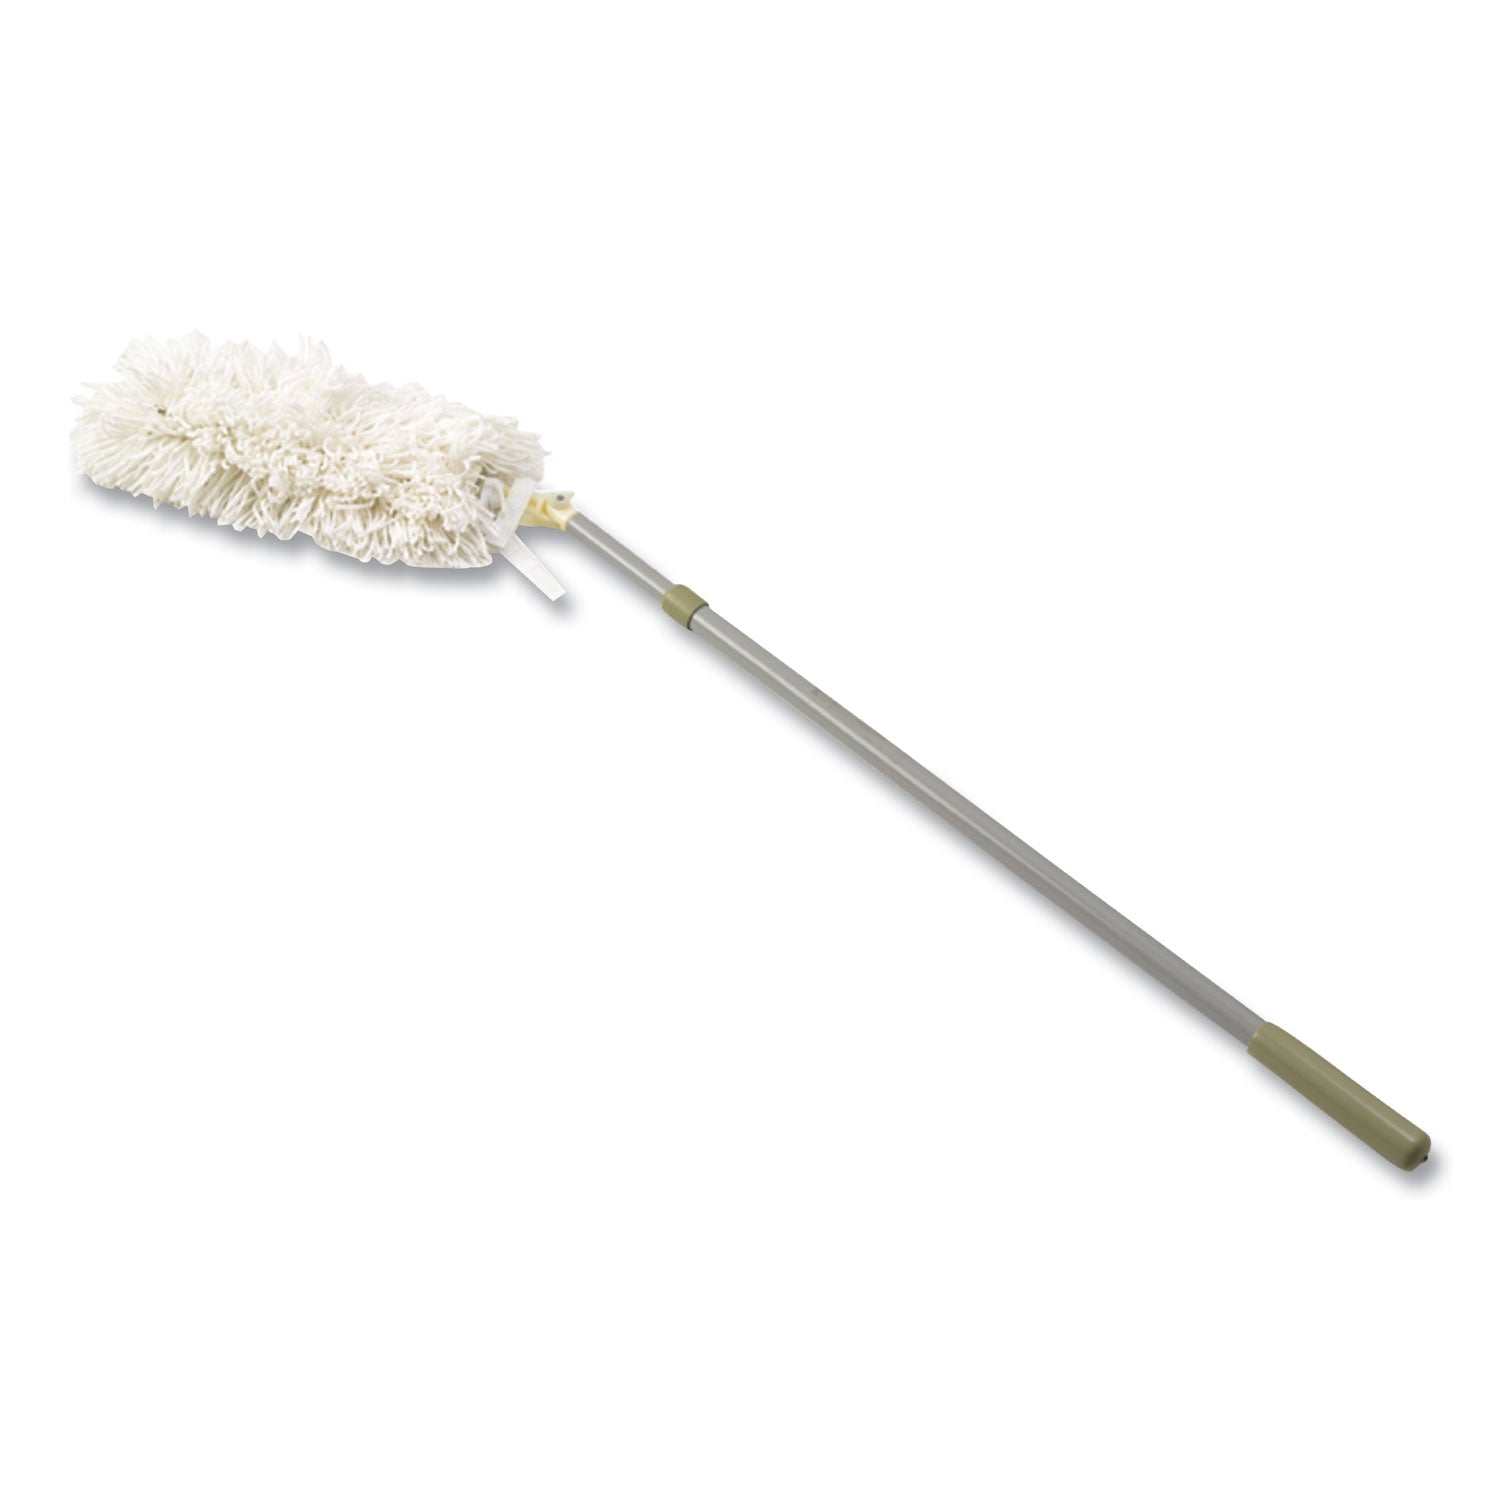 HiDuster Dusting Tool with Angled Launderable Head, 51" Extension Handle - 